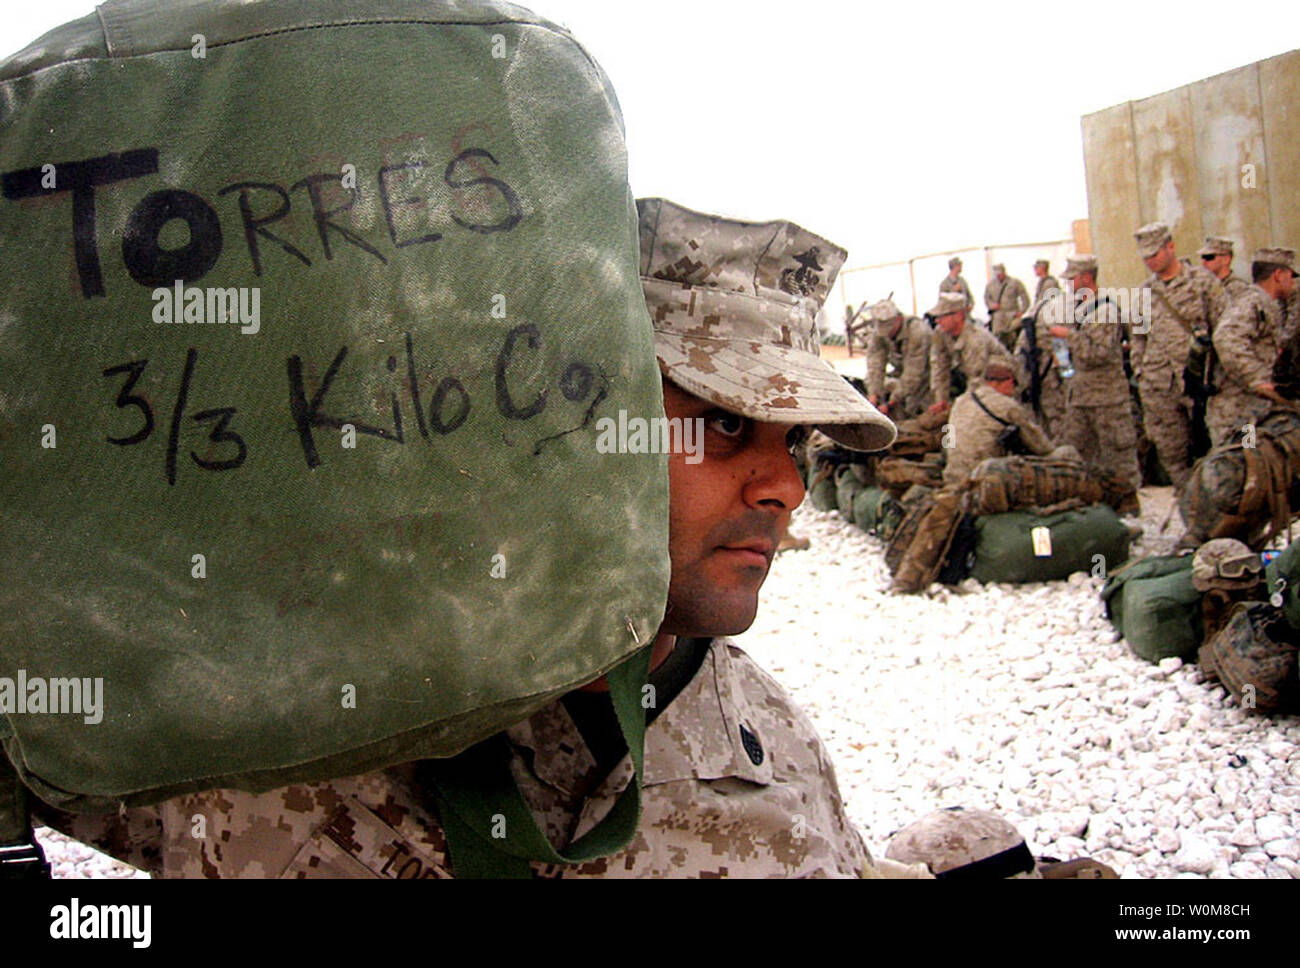 Staff Sgt. Ronnie Torres, a 29-year-old platoon sergeant from Kilo Company, 3rd Battalion, 3rd Marine Regiment, based out of Kaneohe Bay, Hawaii, carries his sea bag to his tent after arriving to an airbase at Al Asad, Iraq, March 17, 2006. Just eight months after their deployment to Afghanistan, the Hawaii-based Marines have departed their base in Hawaii for a seven-month deployment in support of Operation Iraqi Freedom.  (UPI Photo/Sgt. Roe F. Seigle/USMC) Stock Photo